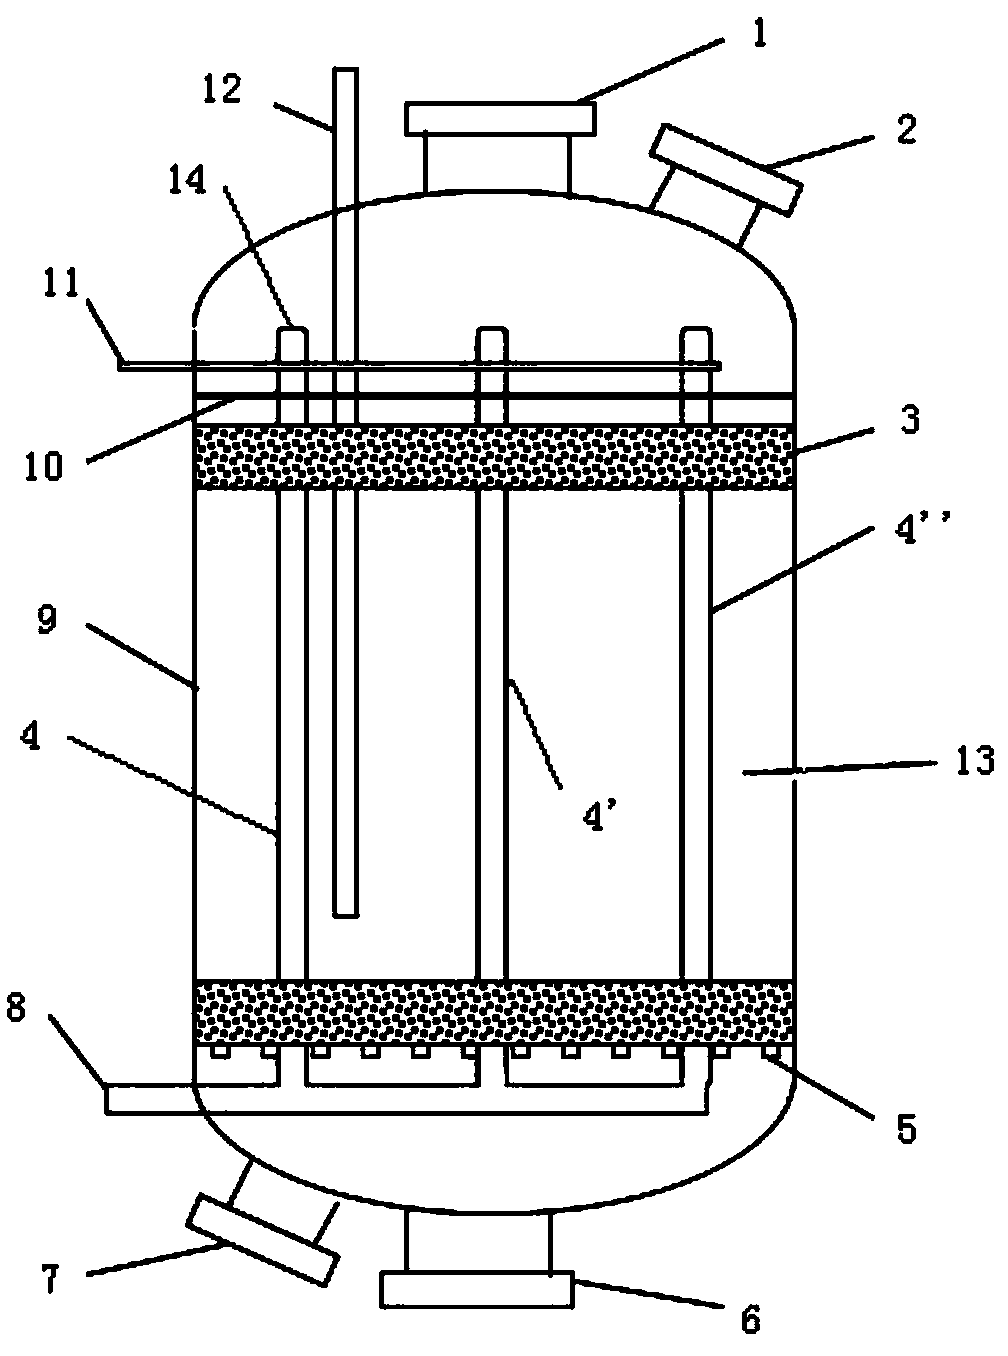 Fixed bed reactor and unsaturated light hydrocarbon hydrogenation method